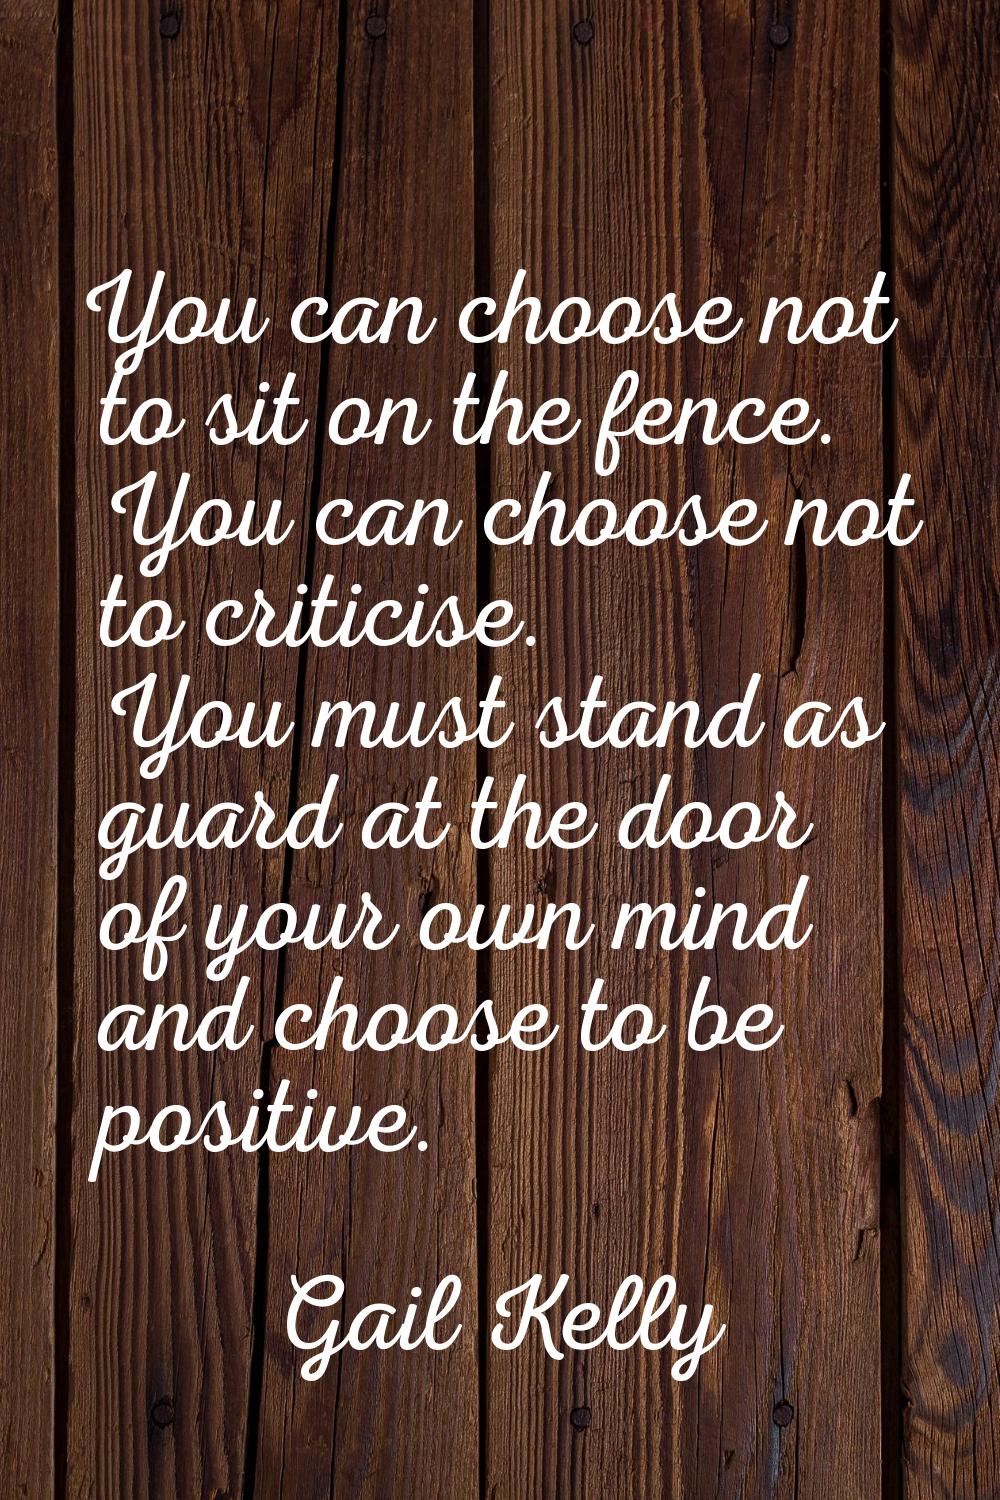 You can choose not to sit on the fence. You can choose not to criticise. You must stand as guard at